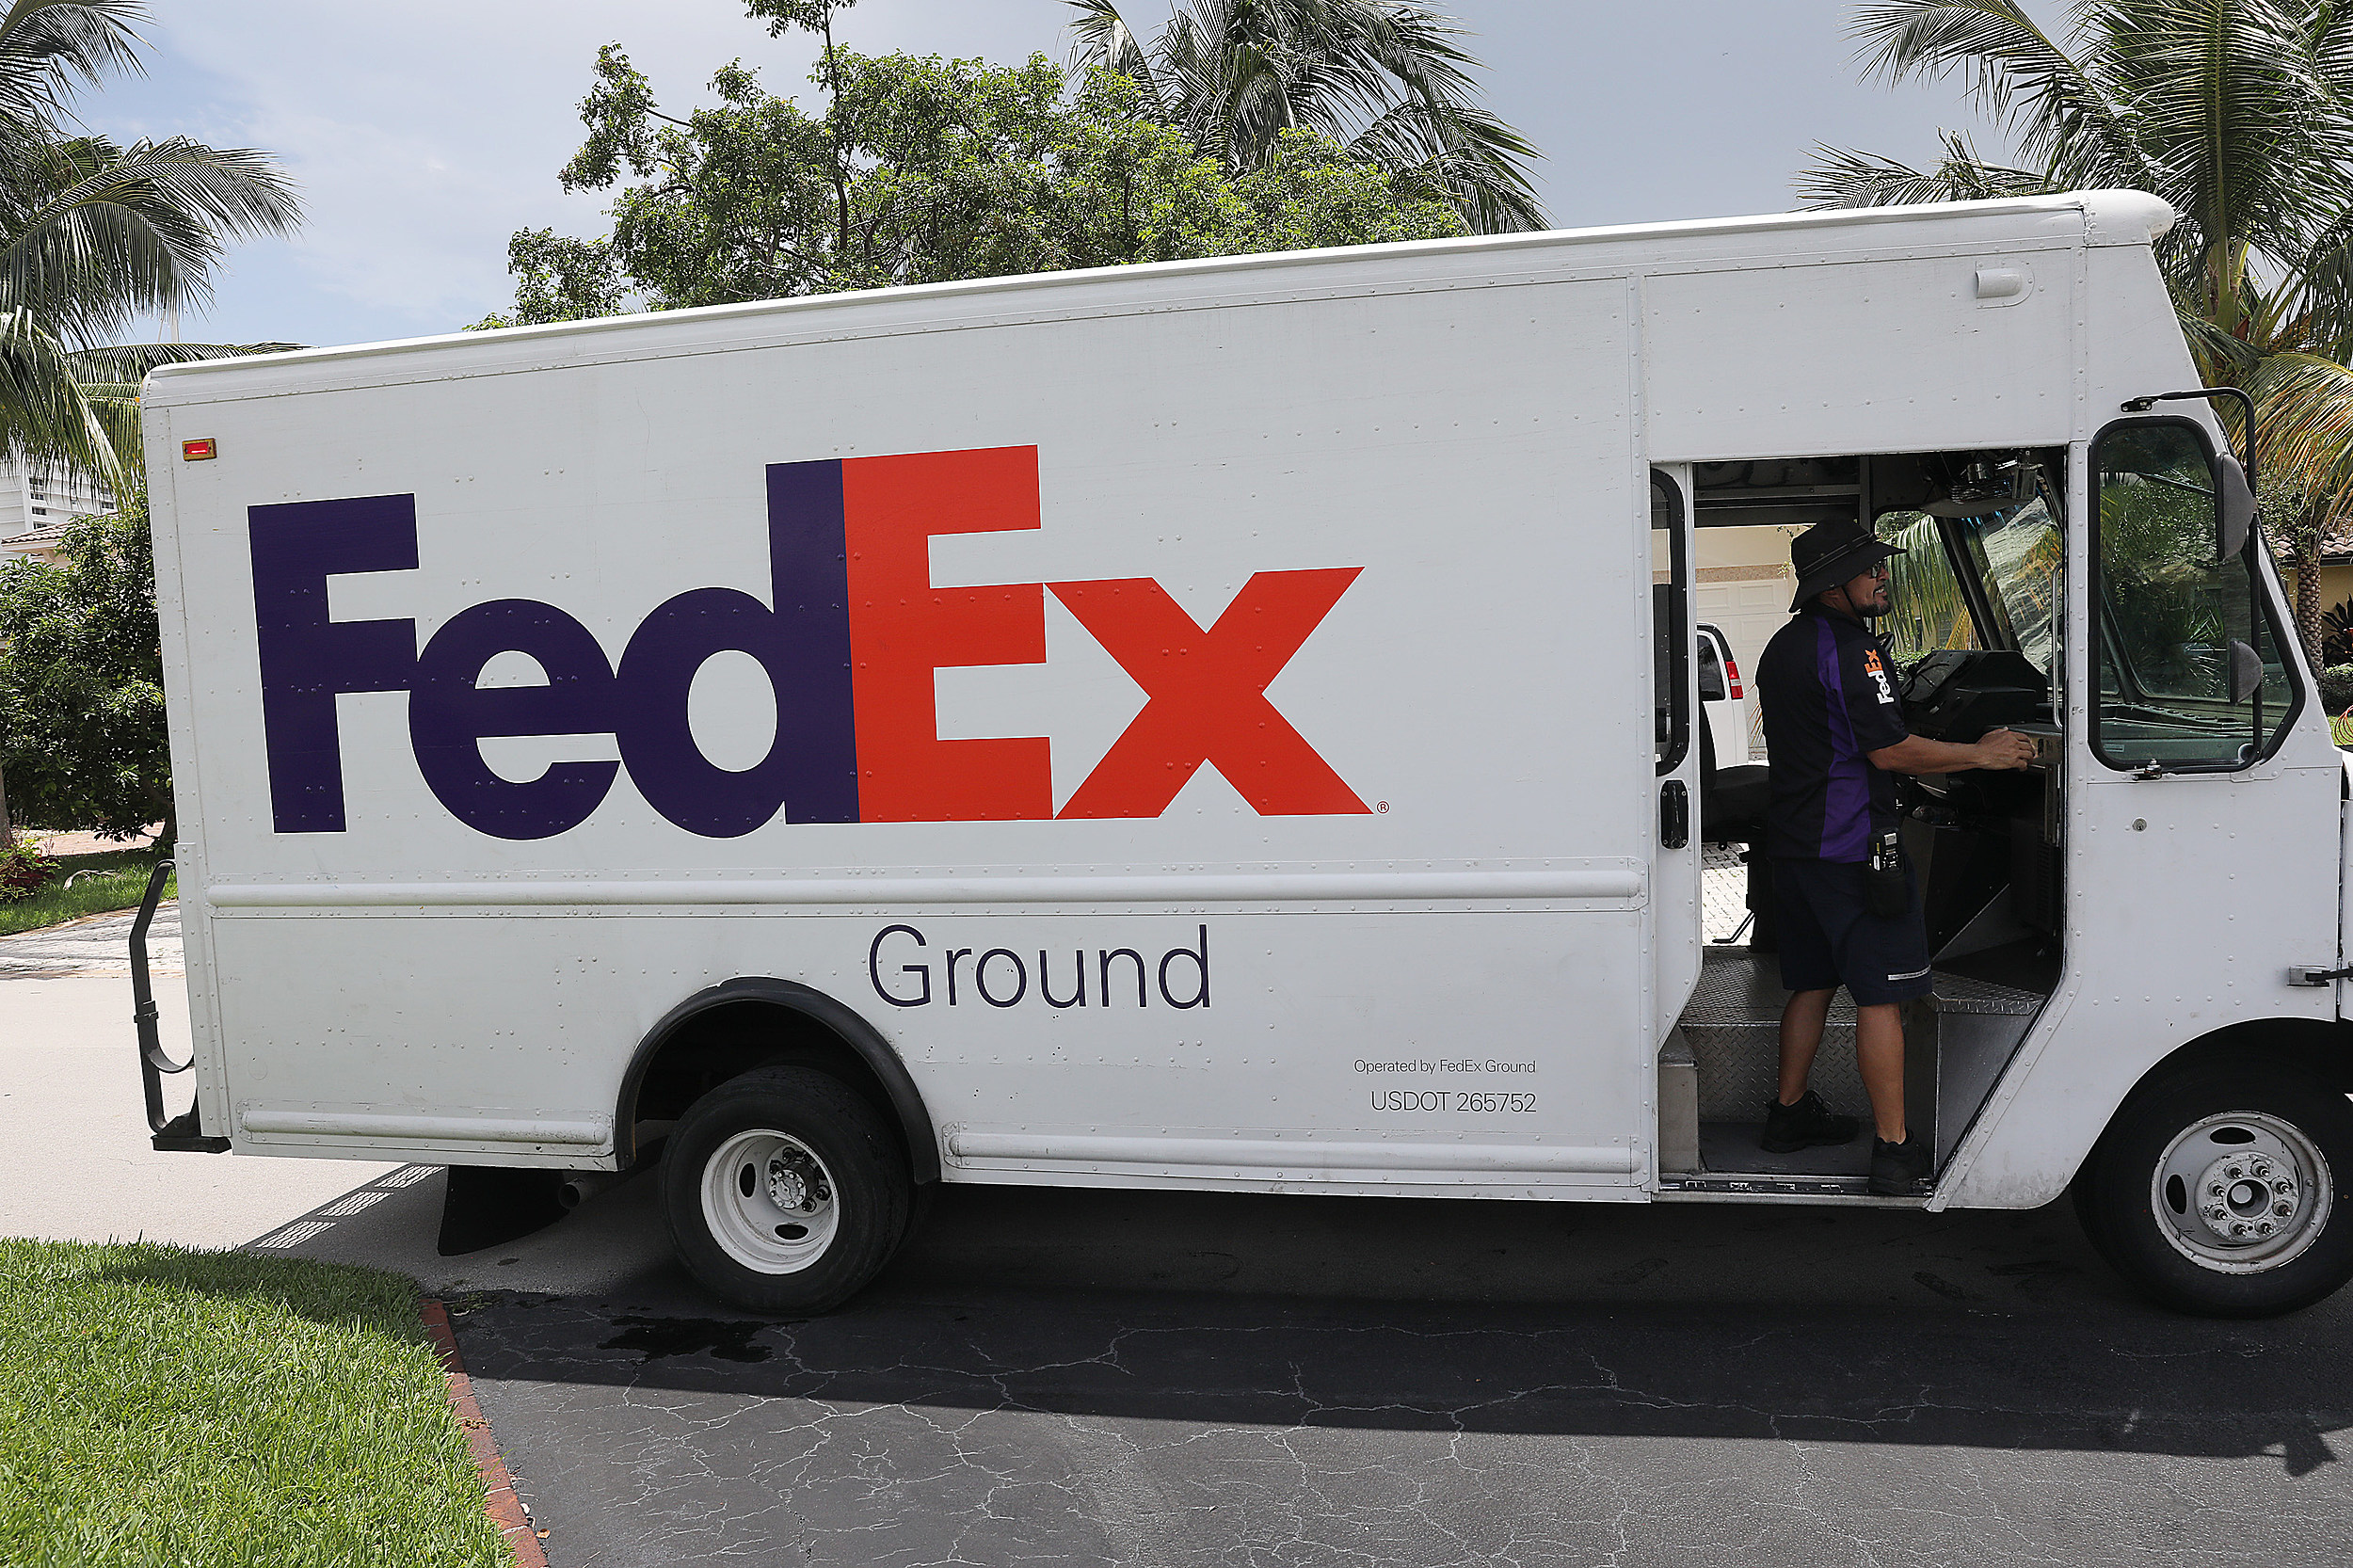 when does fedex deliver